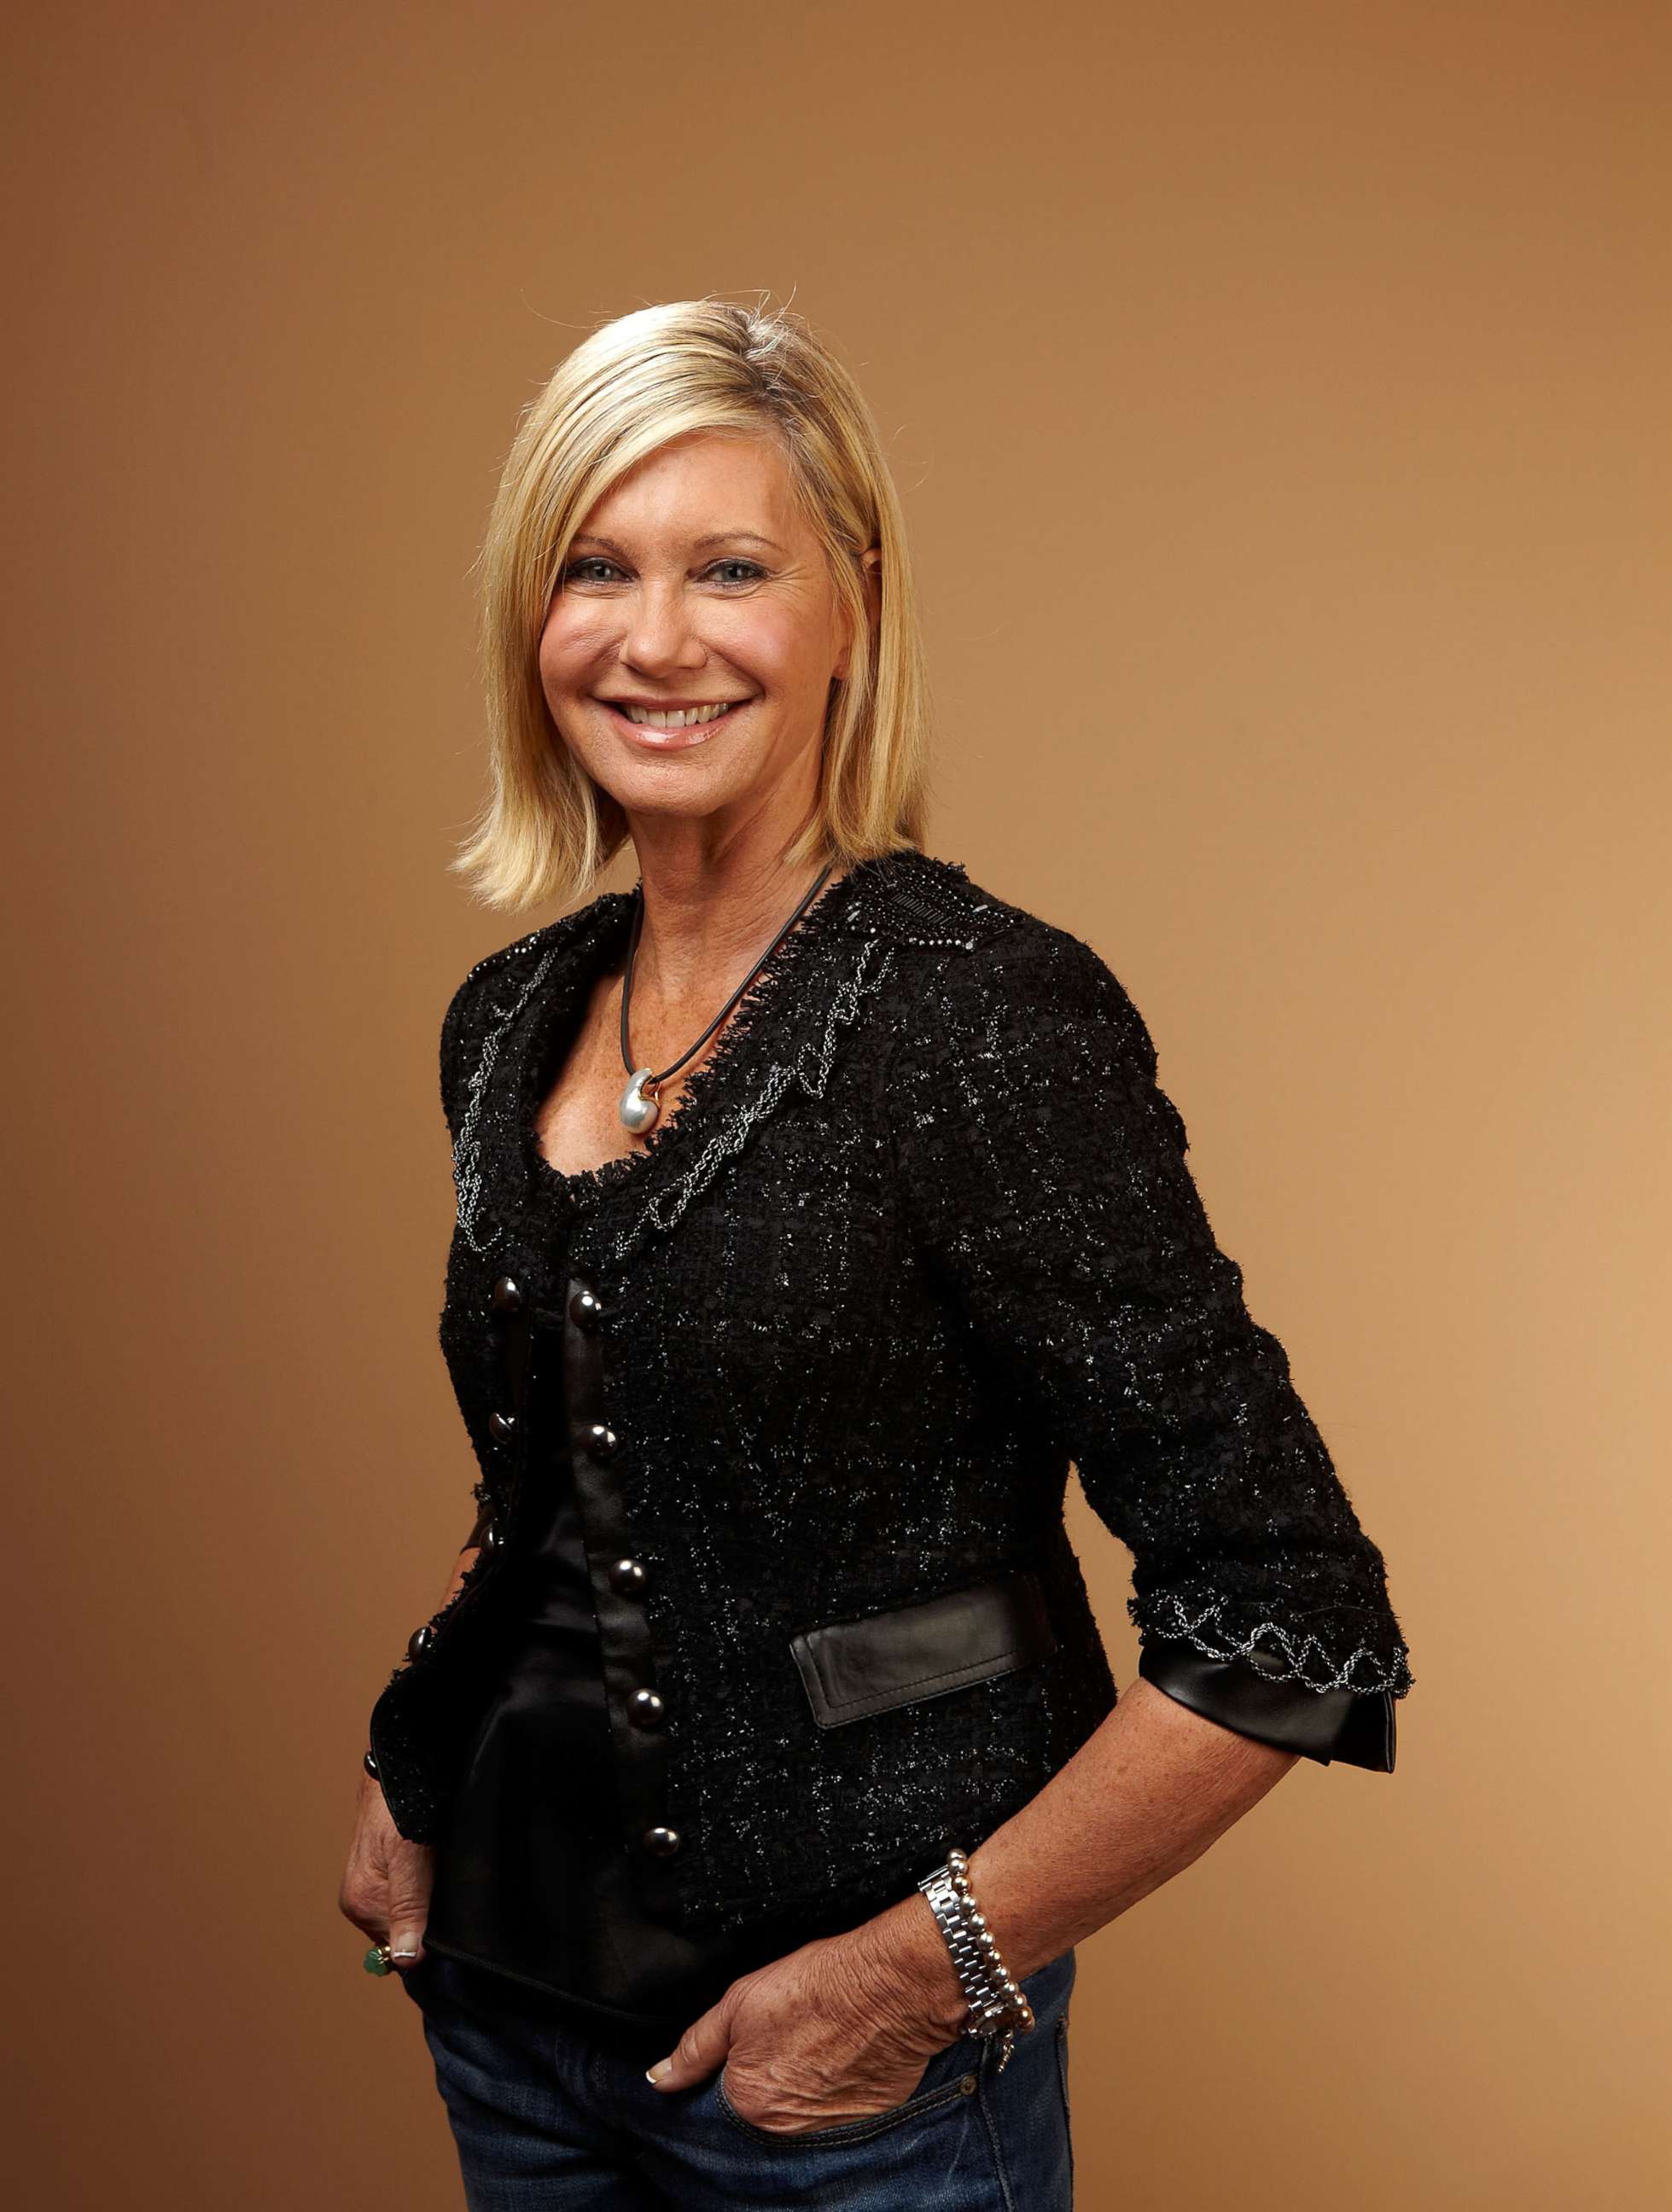 PHOTO: In this Sept. 10, 2010, file photo, Olivia Newton John poses for a portrait during the 2010 Toronto International Film Festival in Toronto, Canada.